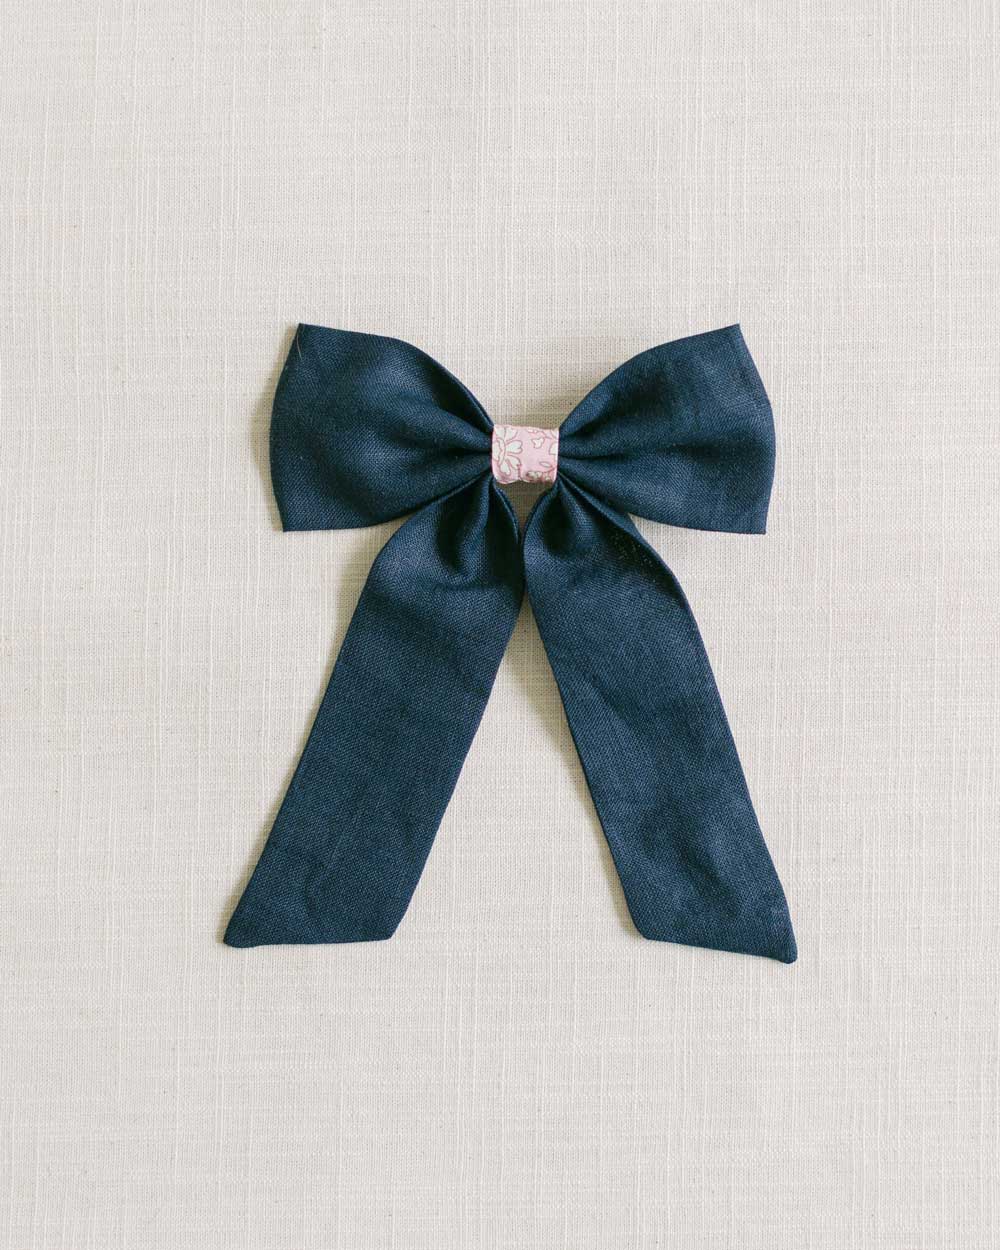 THE NAVY AND PINK CHILDREN'S BOW